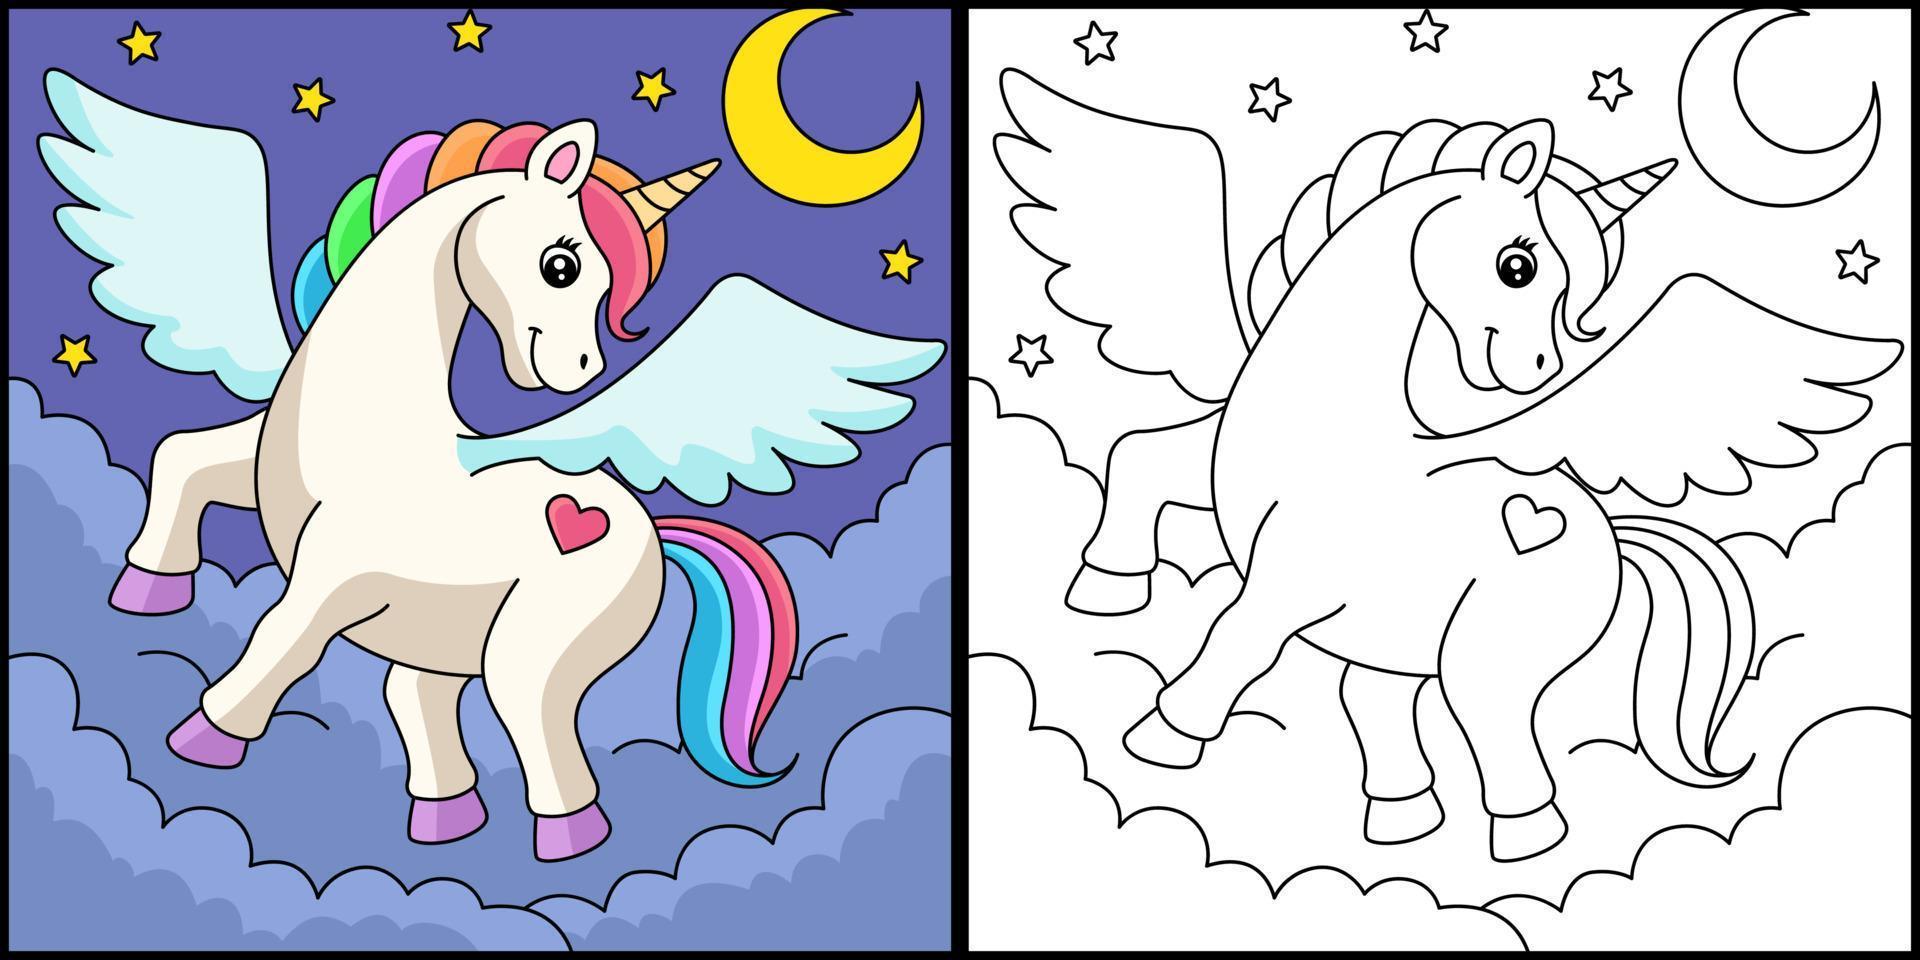 Flying Unicorn Coloring Page Colored Illustration vector